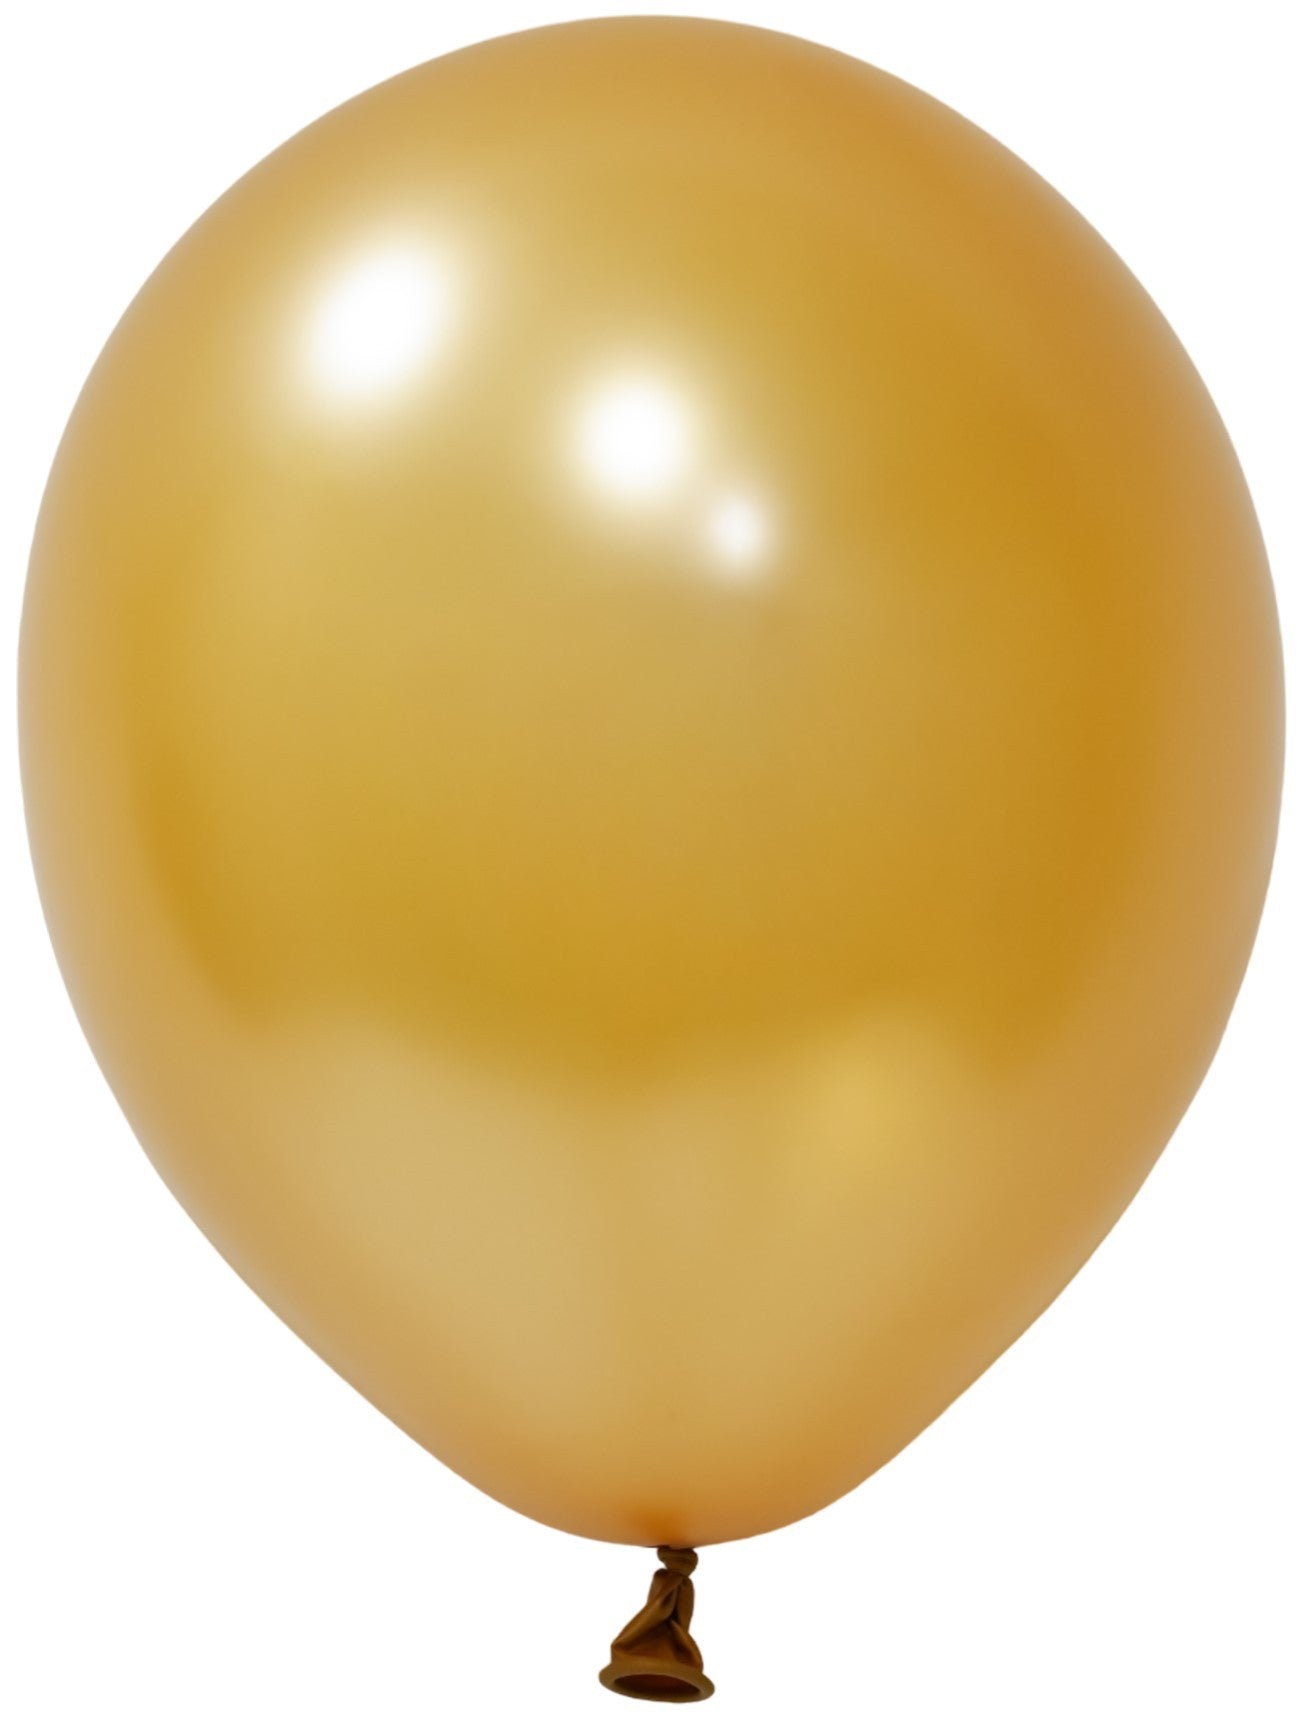 View Gold Metallic Latex Balloon 10inch Pack of 100 information